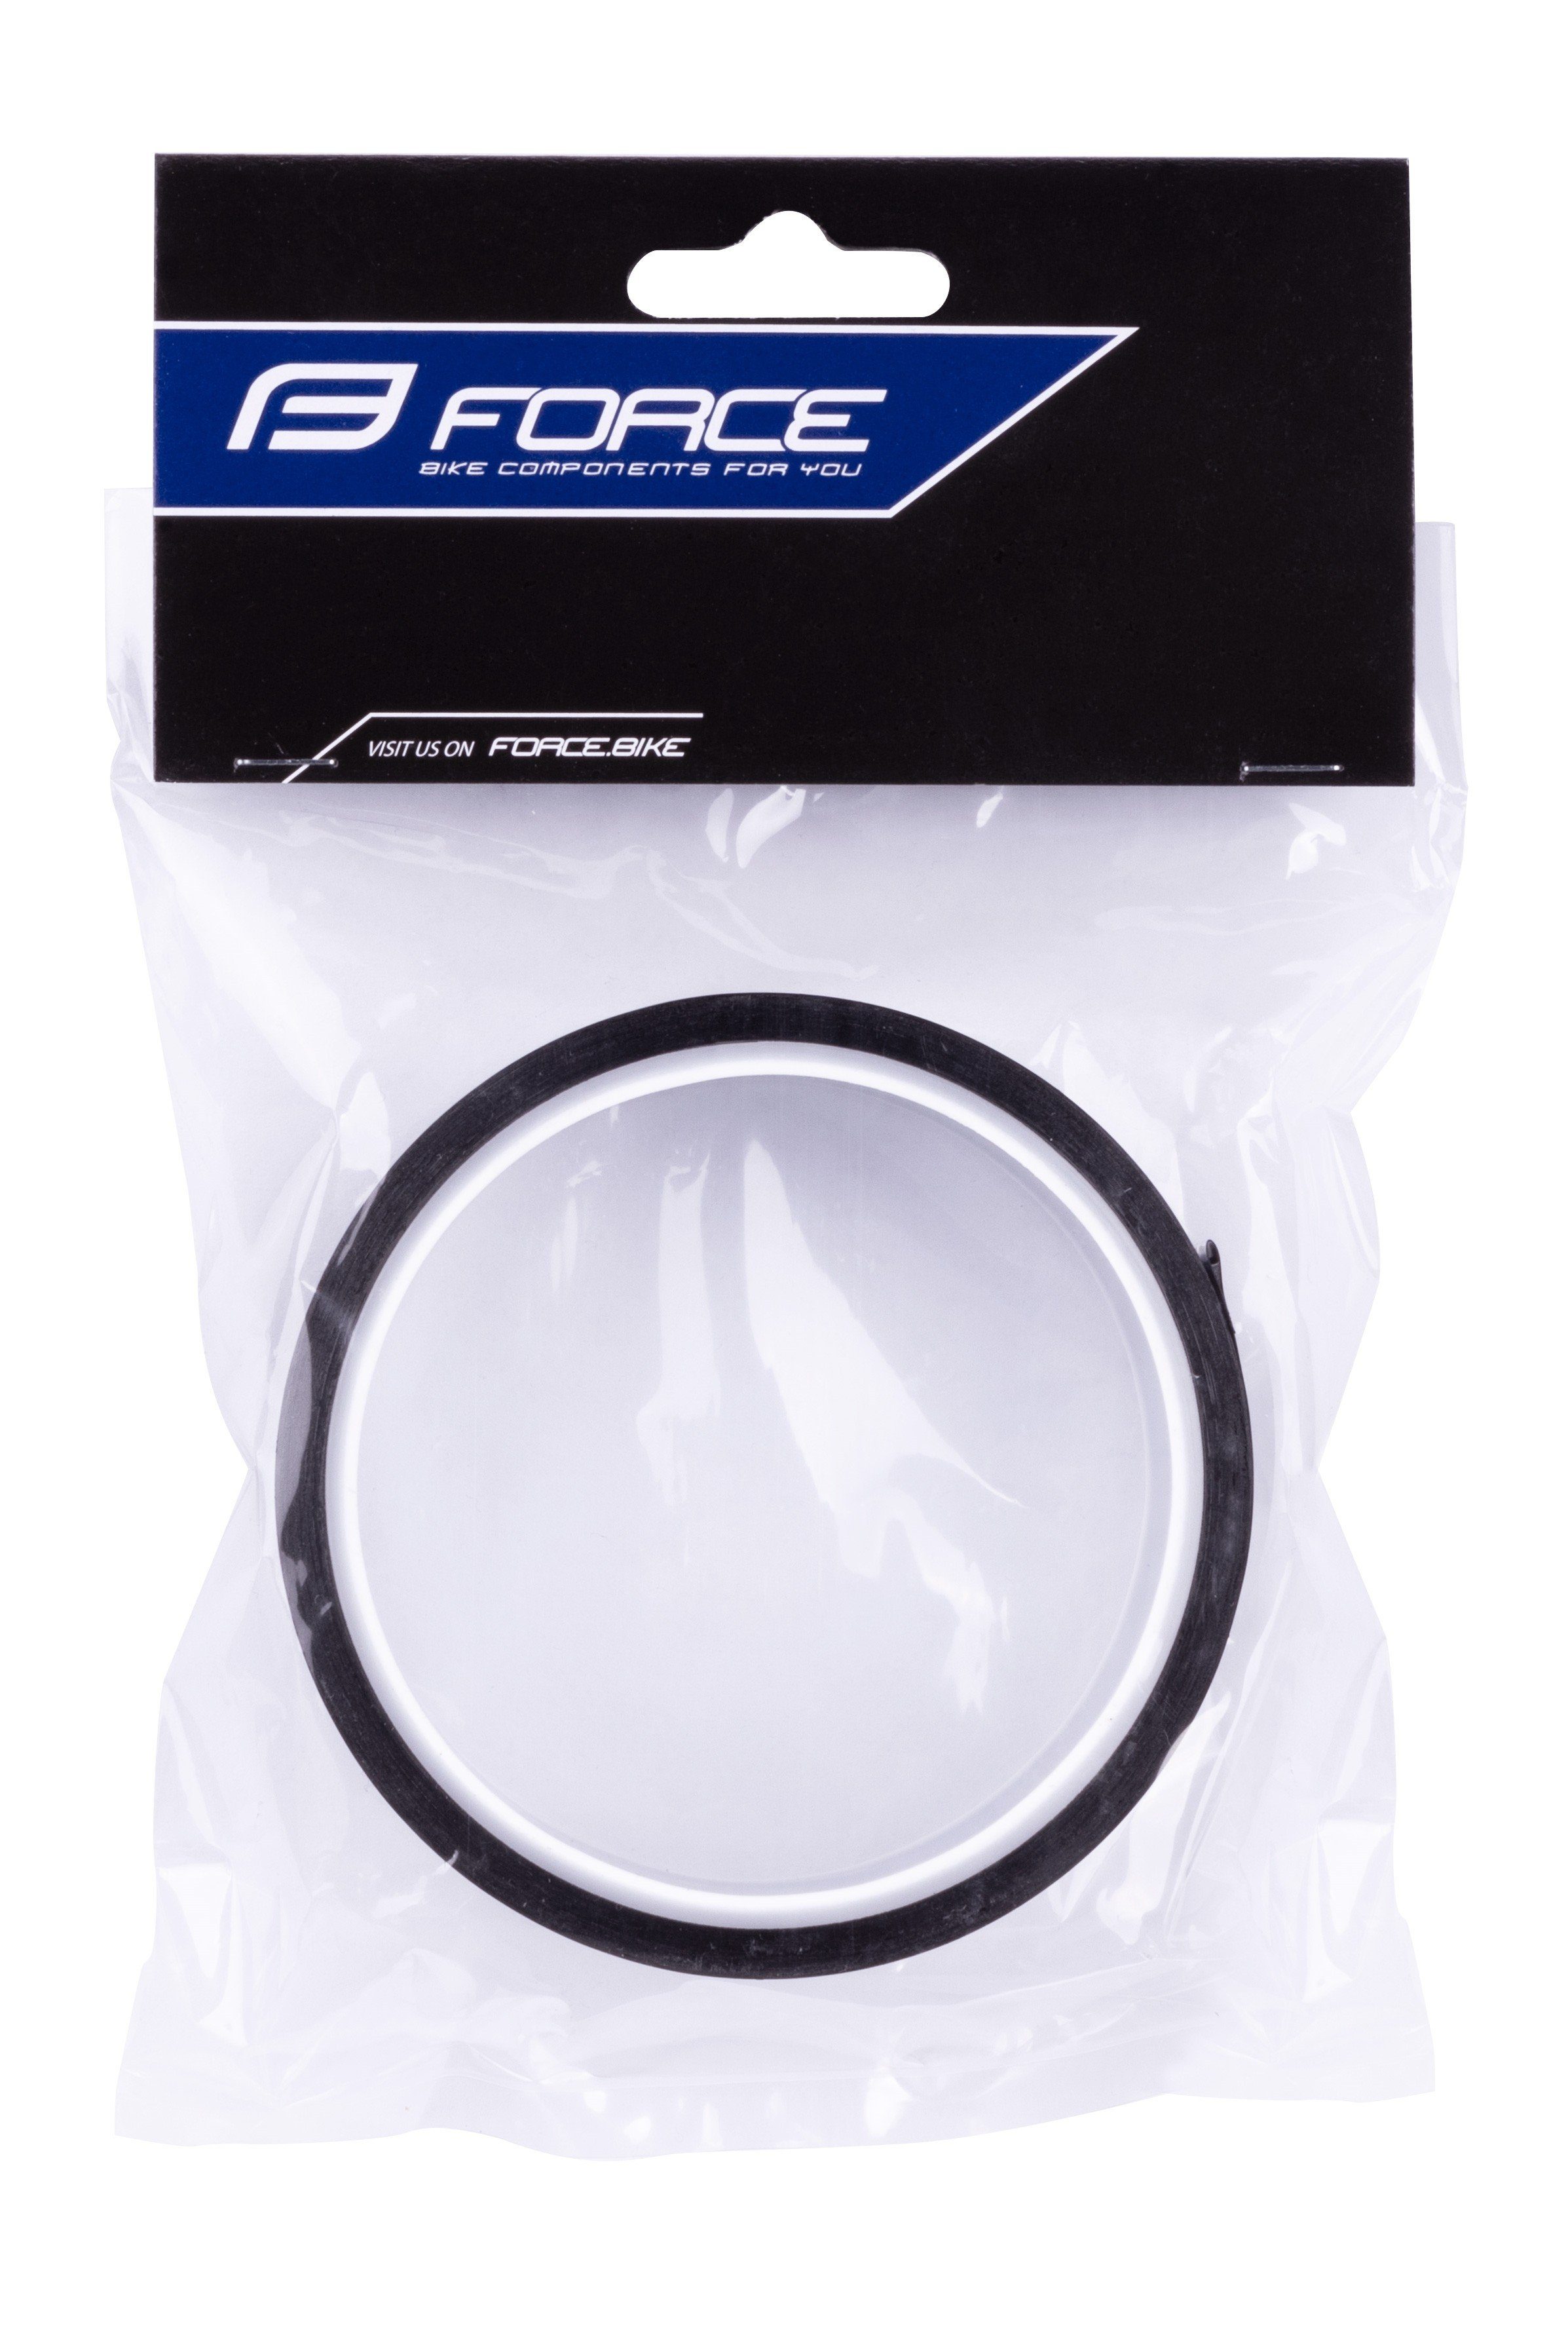 FORCE self-adhesive 10m rim x Tubeless Fahrradschlauch 30mm tape FORCE